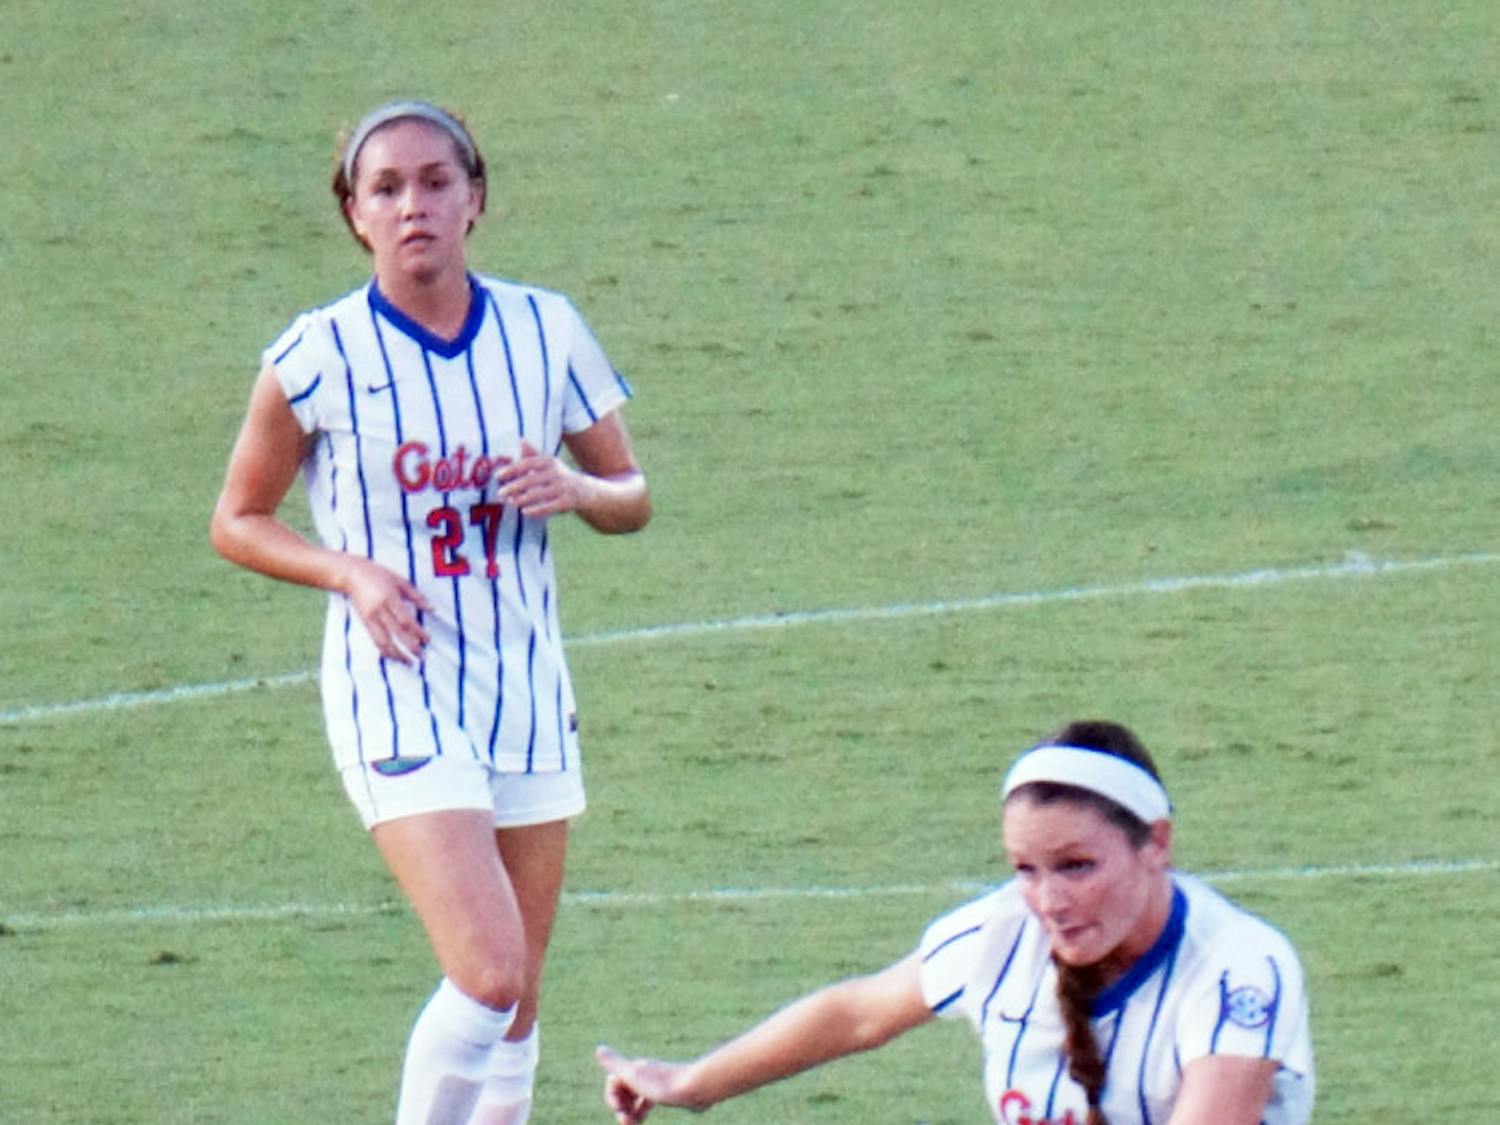 UF forward Brooke Sharp shoots during Florida's 2-1 loss to Texas A&amp;M on Sept. 10, 2015 at Donald R. Dizney Stadium.